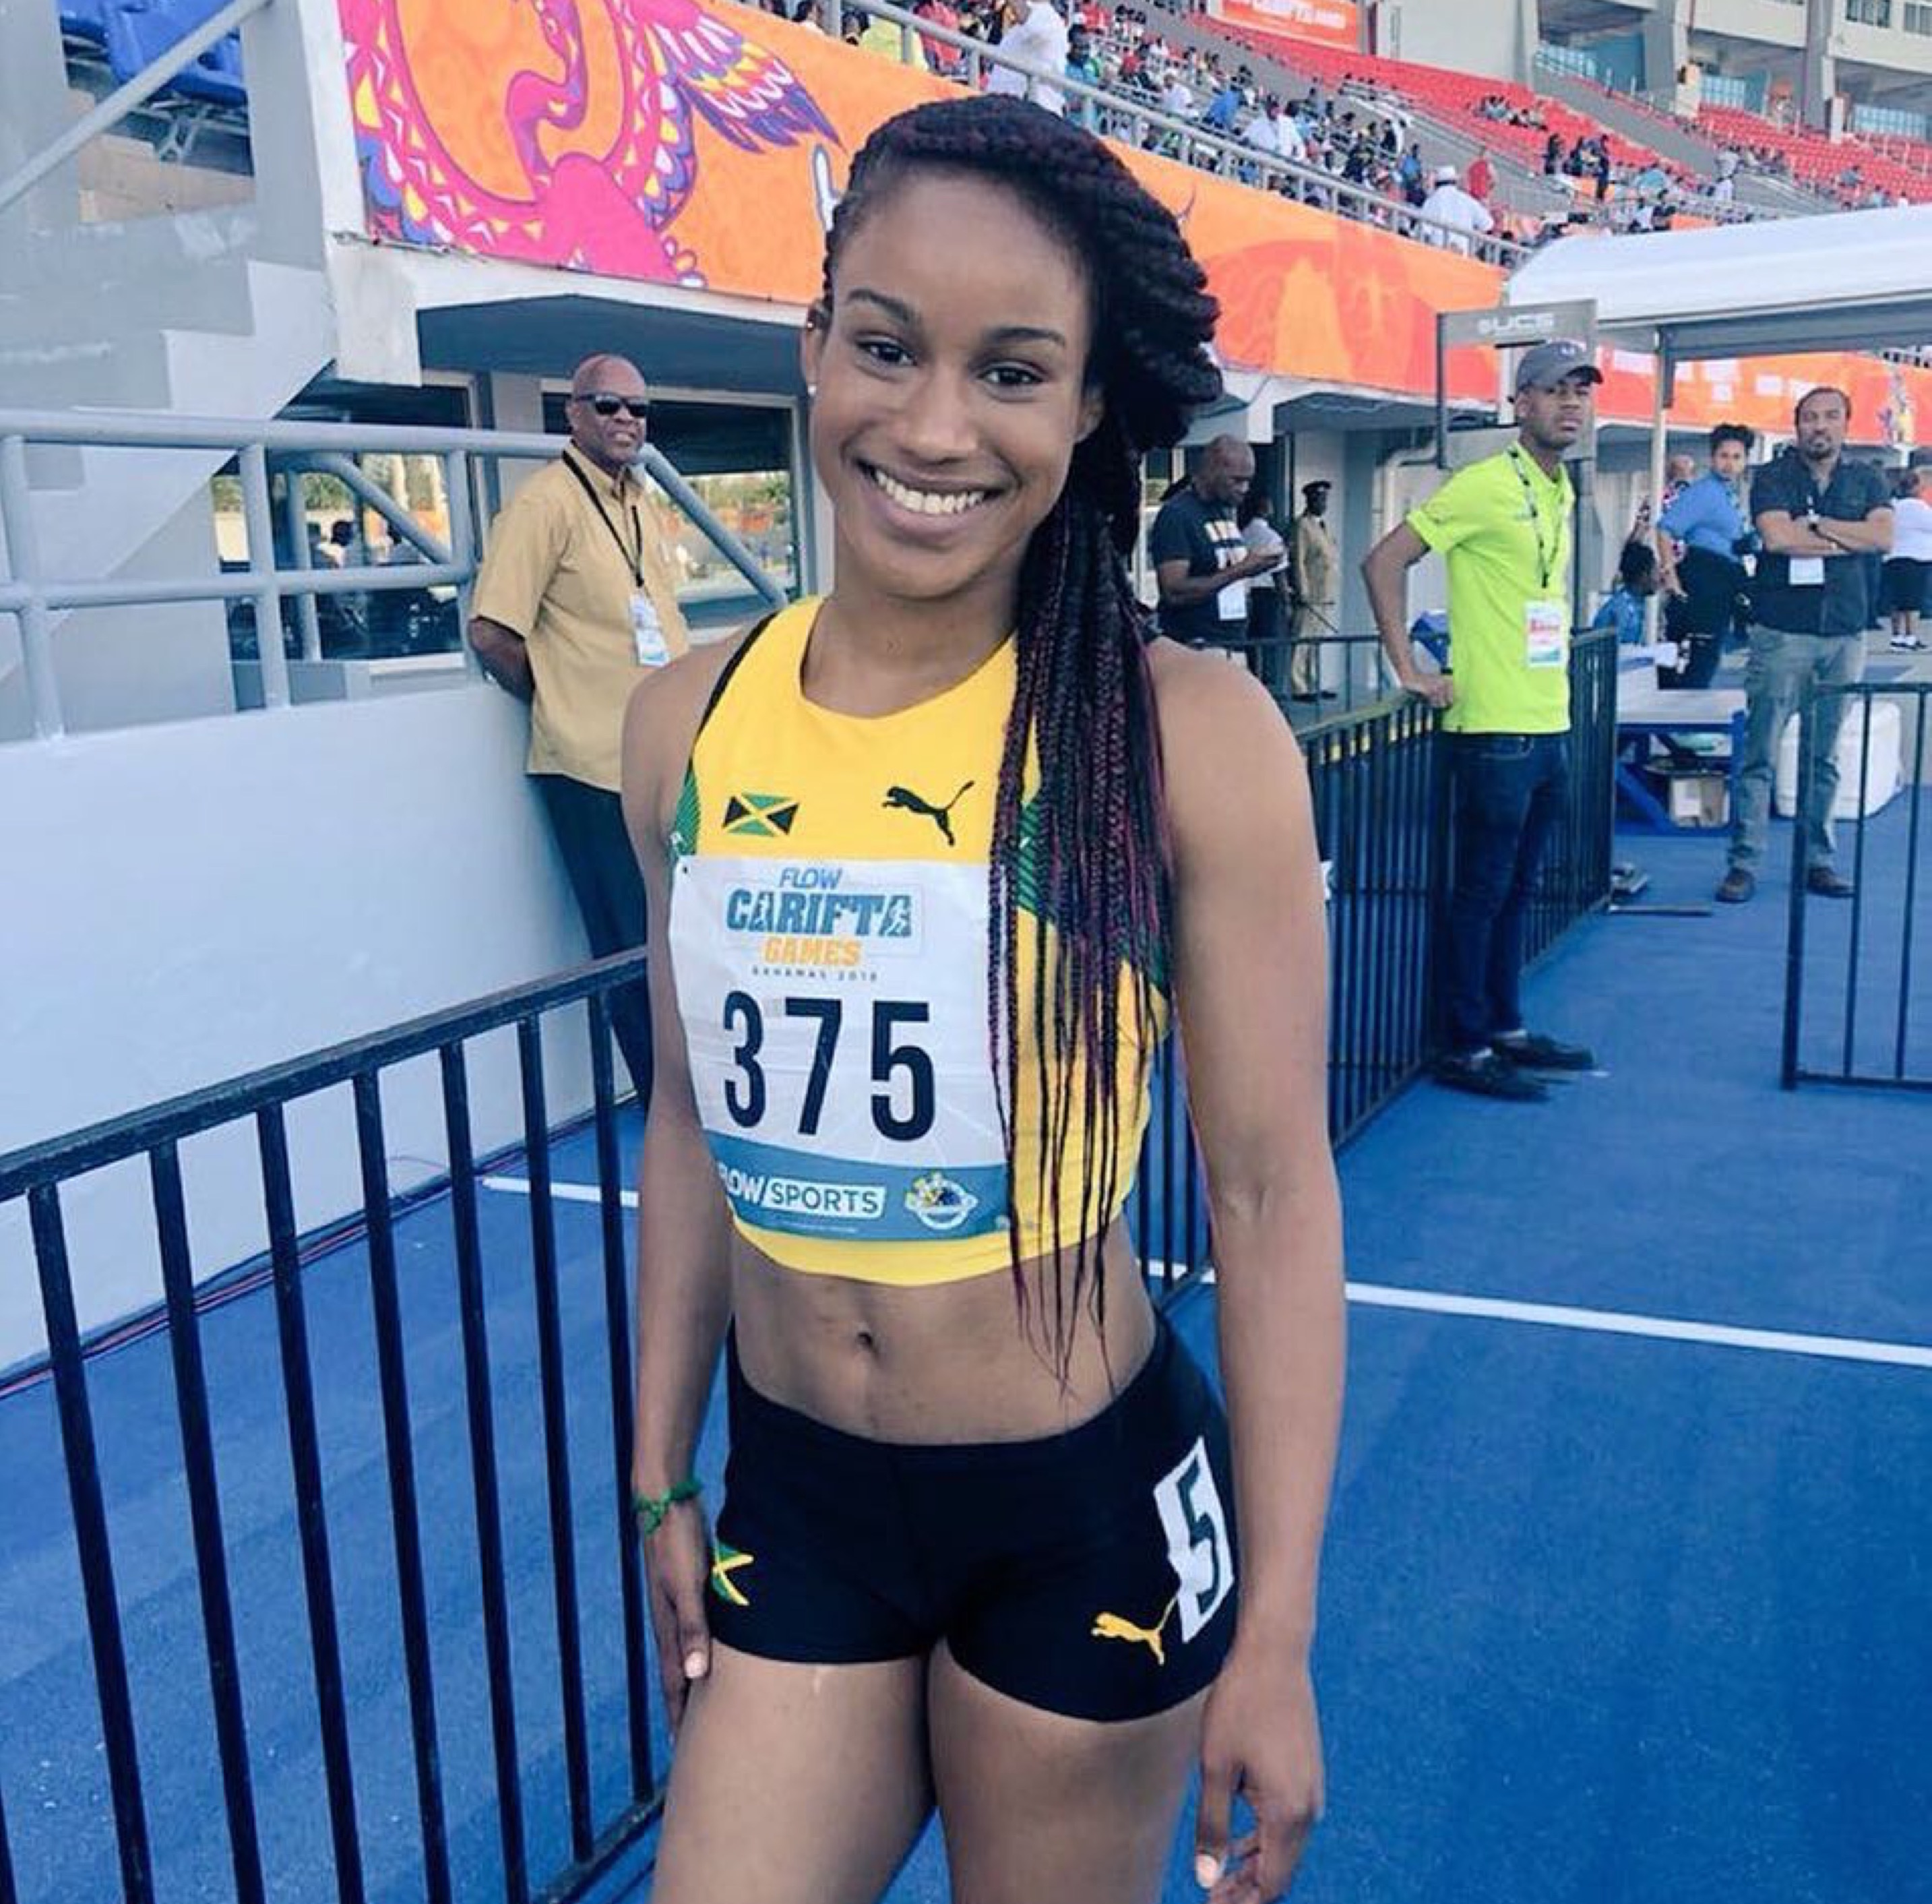 Williams highlights day 1 with 100m record #CariftaGames2018